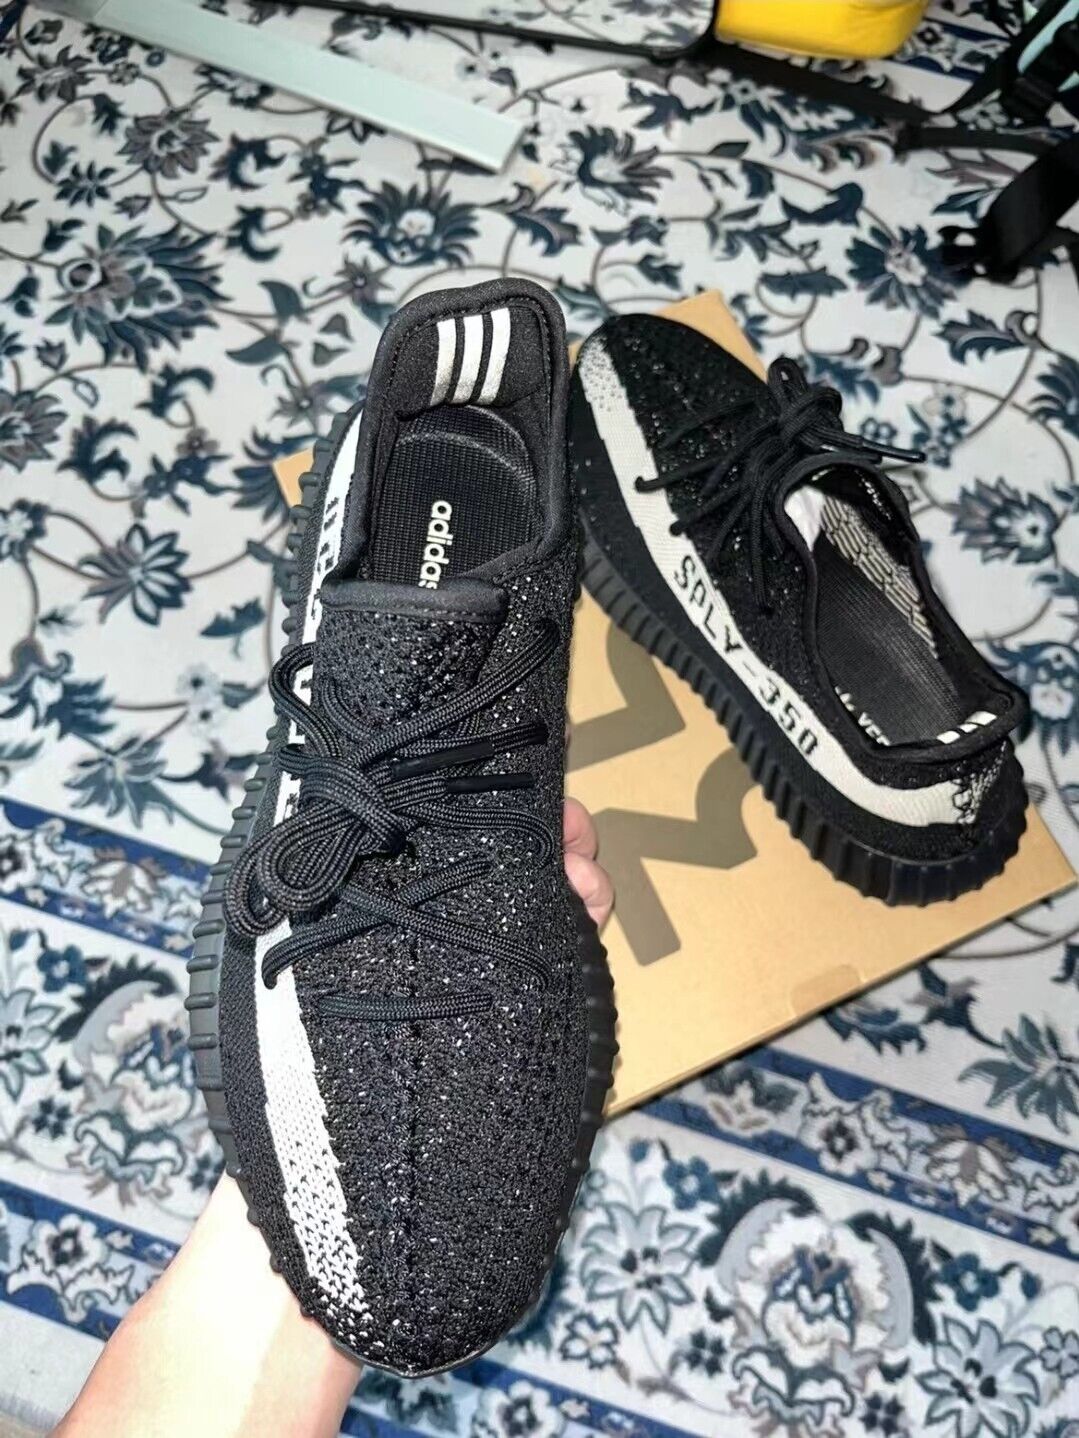 Size+10.5+-+adidas+Yeezy+Boost+350+V2+Low+Oreo for sale online |